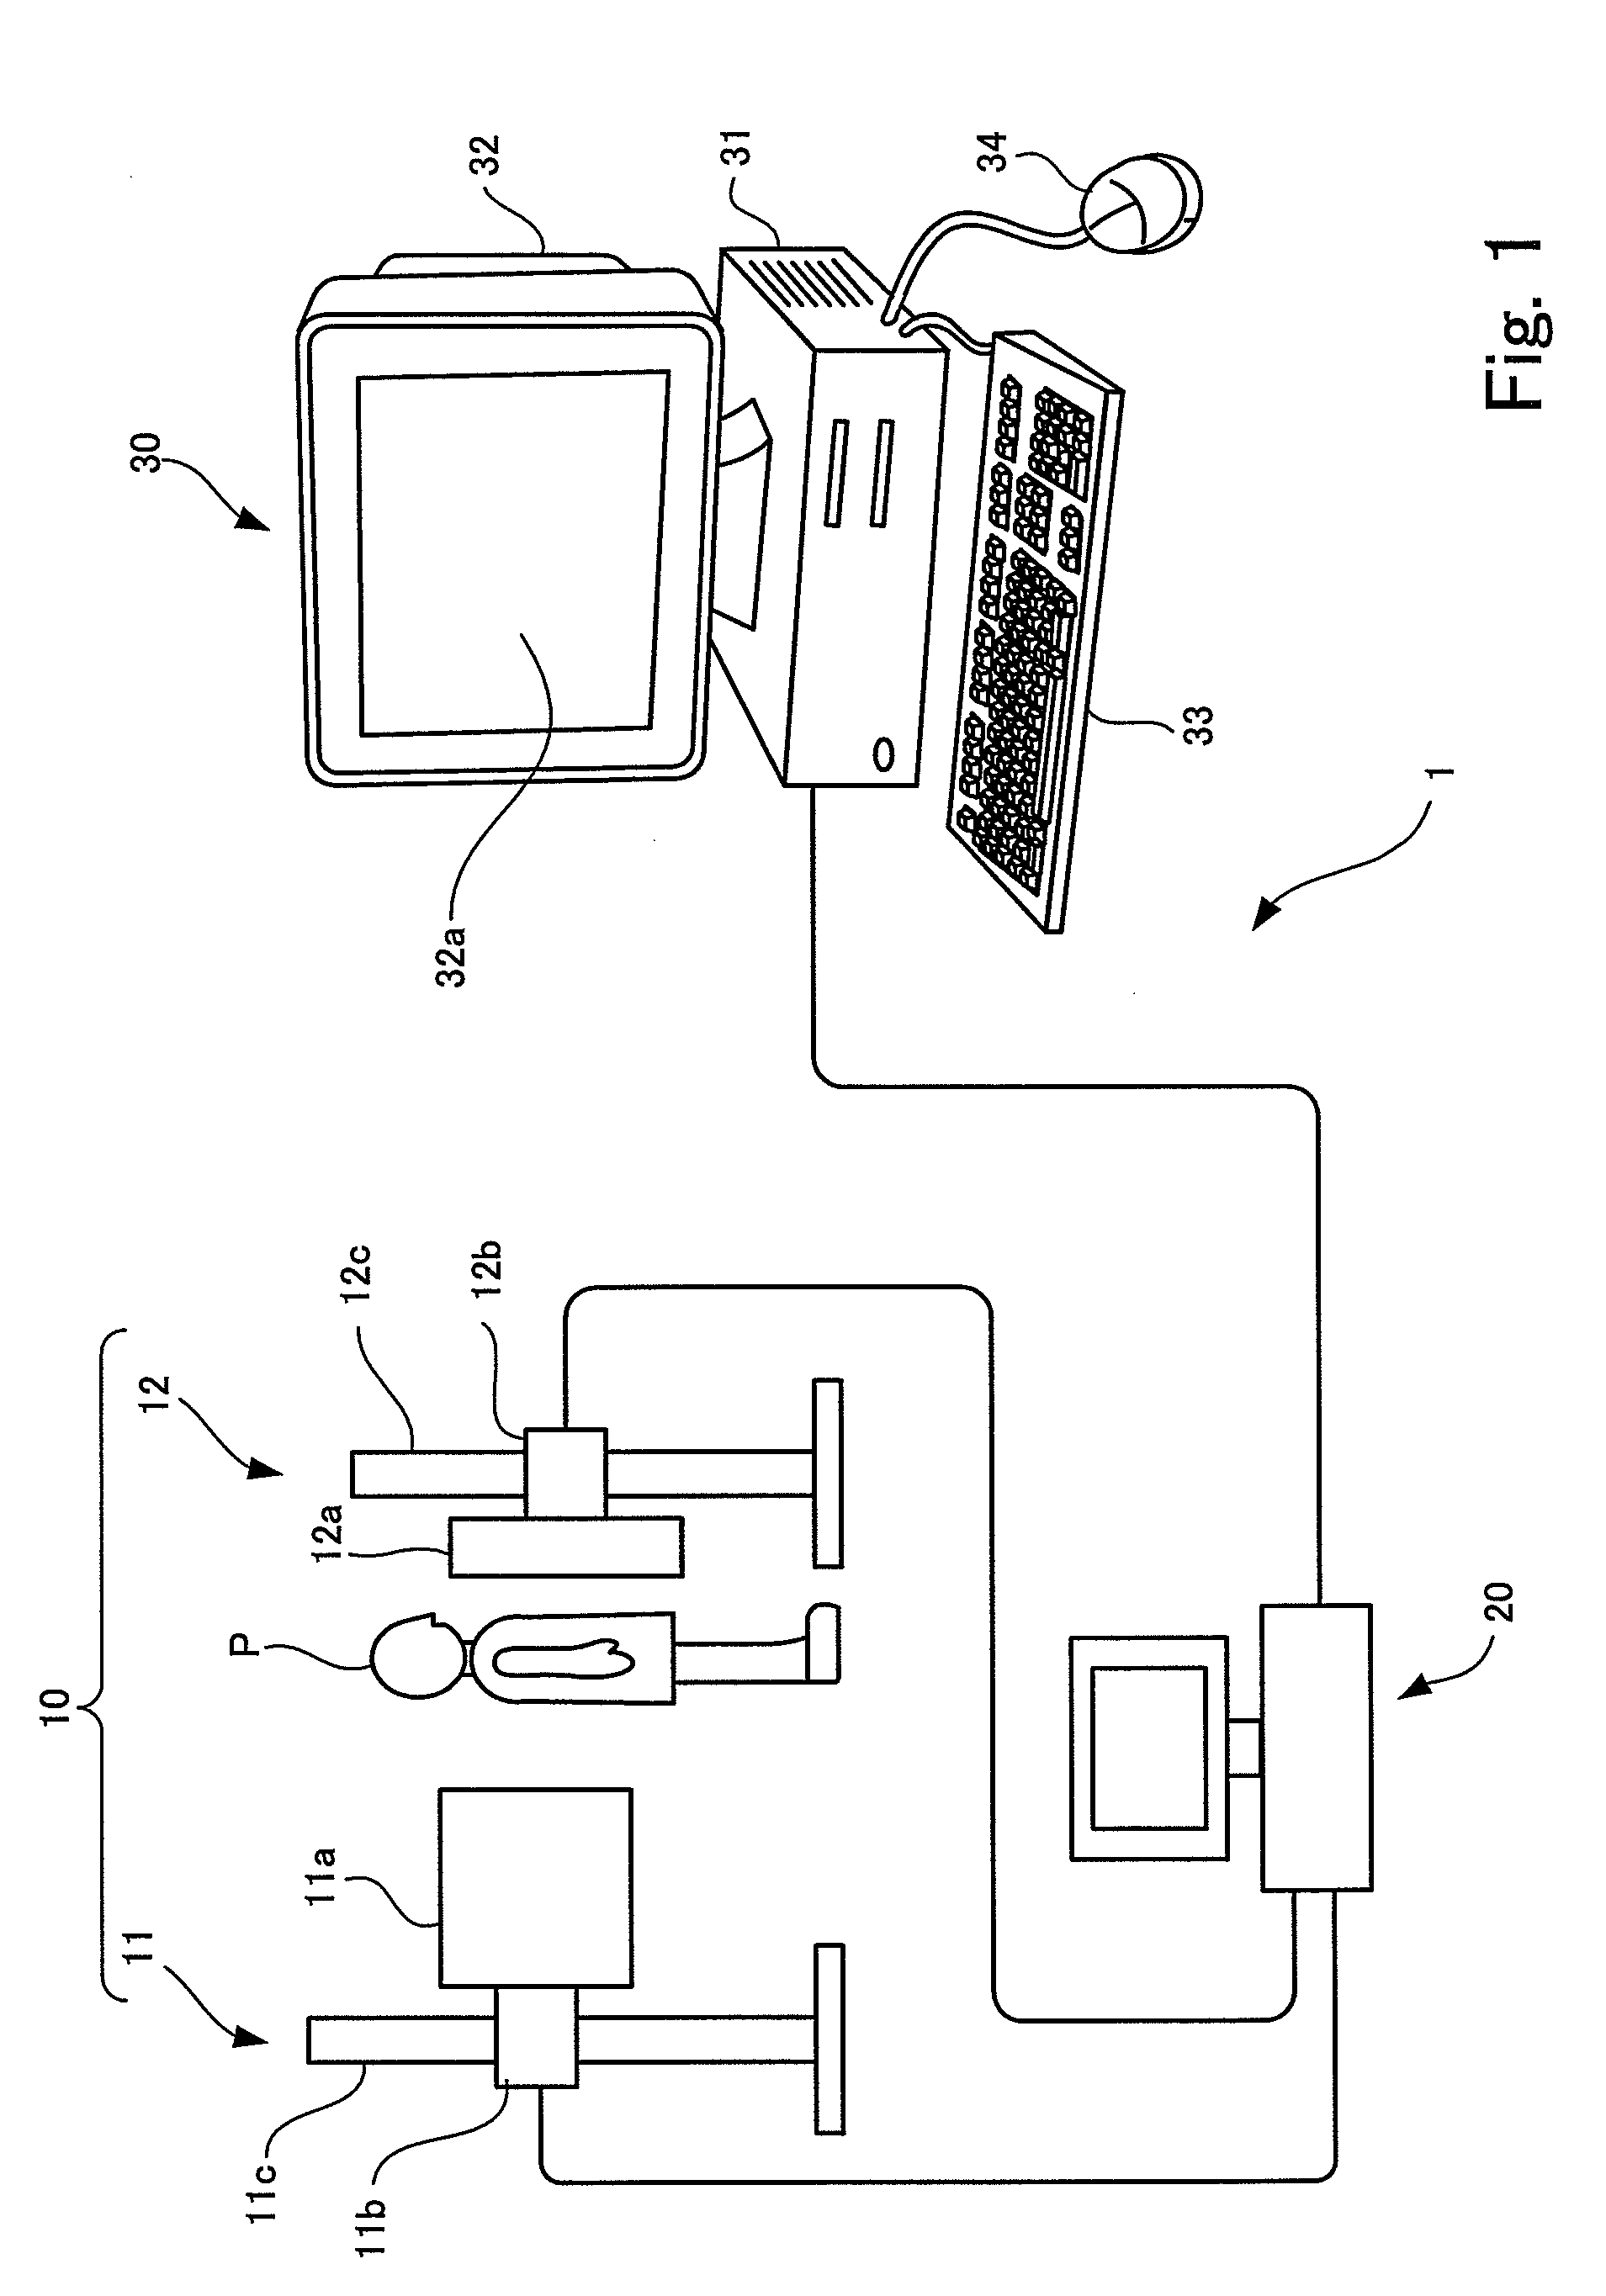 Image processing device that executes an image process of matching two images with each other, and a non-transitory computer-readable medium that stores a program that causes a computer to operate as the image processing device